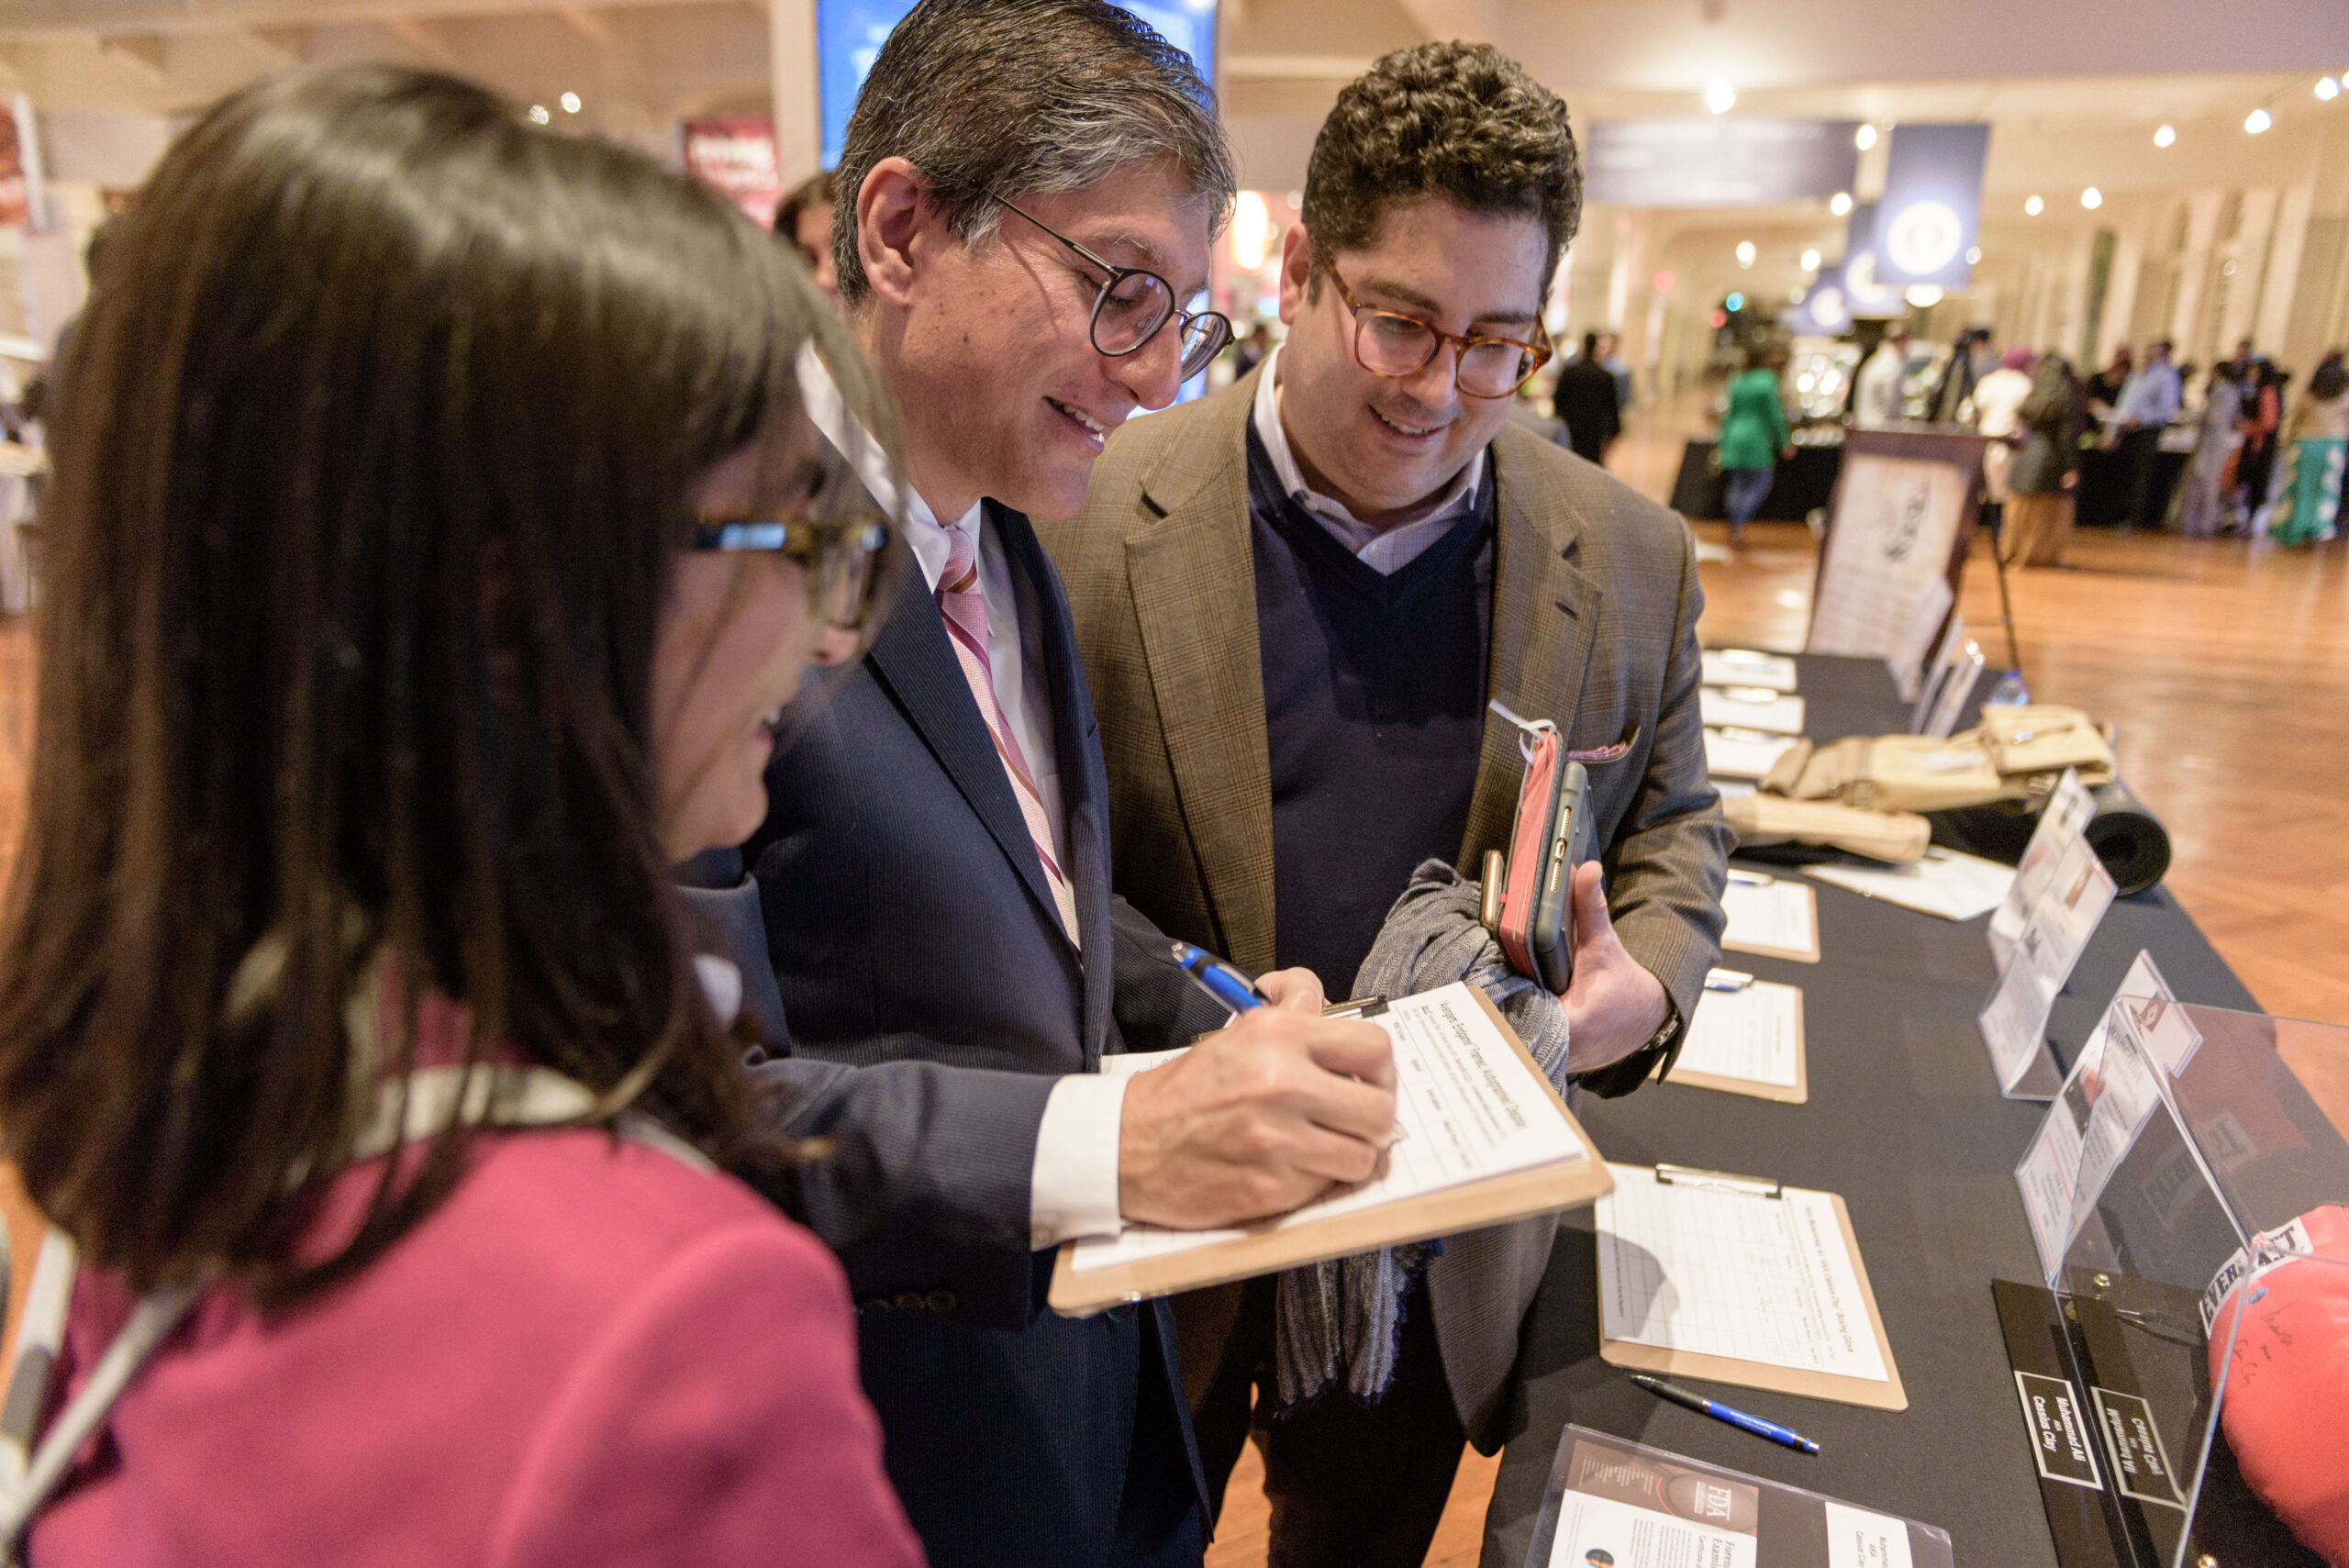 At a promotional table, two men and a woman stand closely, smiling, looking down at a paper on a clipboard.